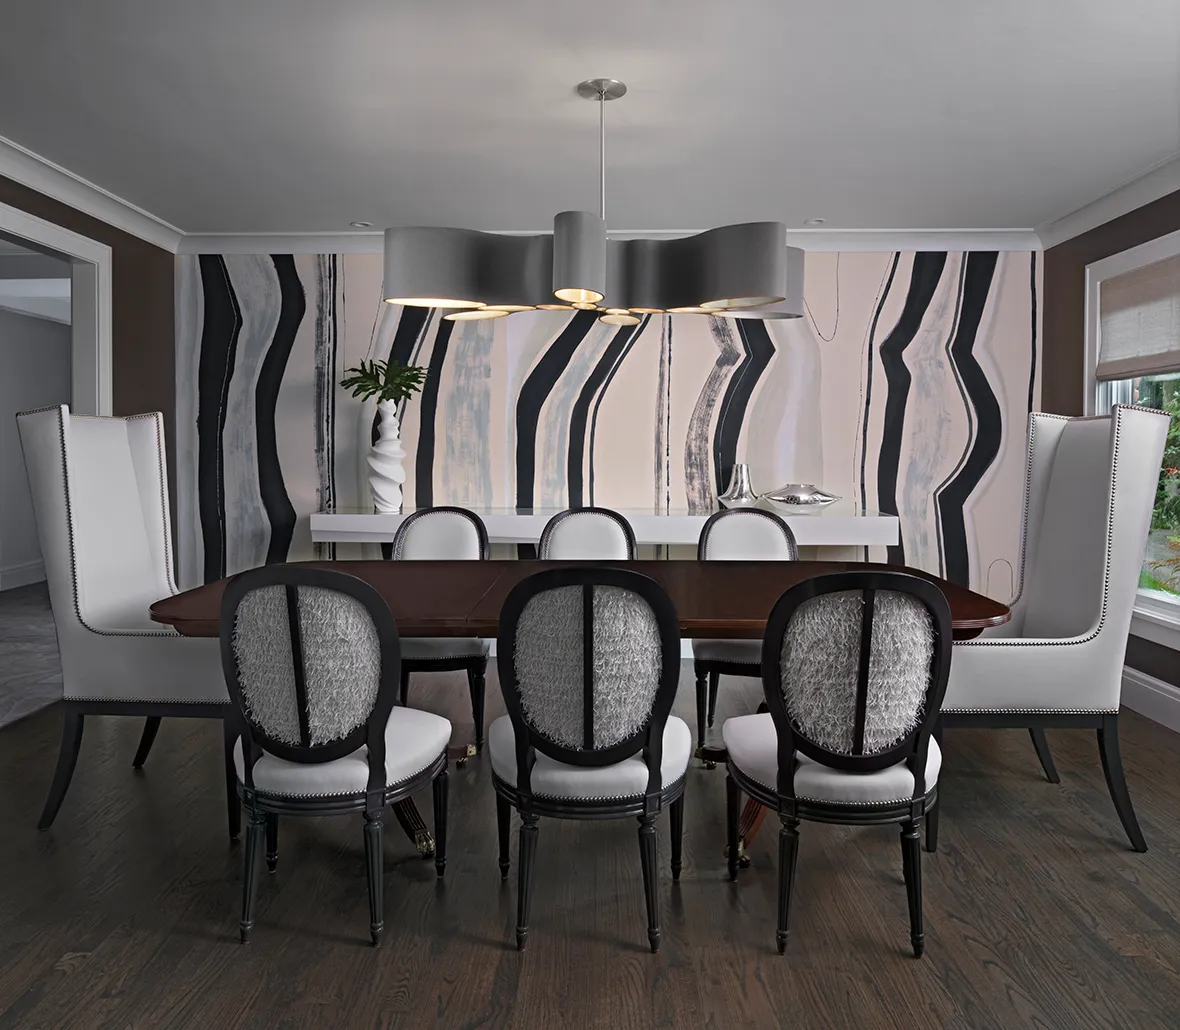 The Lake House Diamond Building Stunning Modern Dining Room with Dramaic Wallpaper